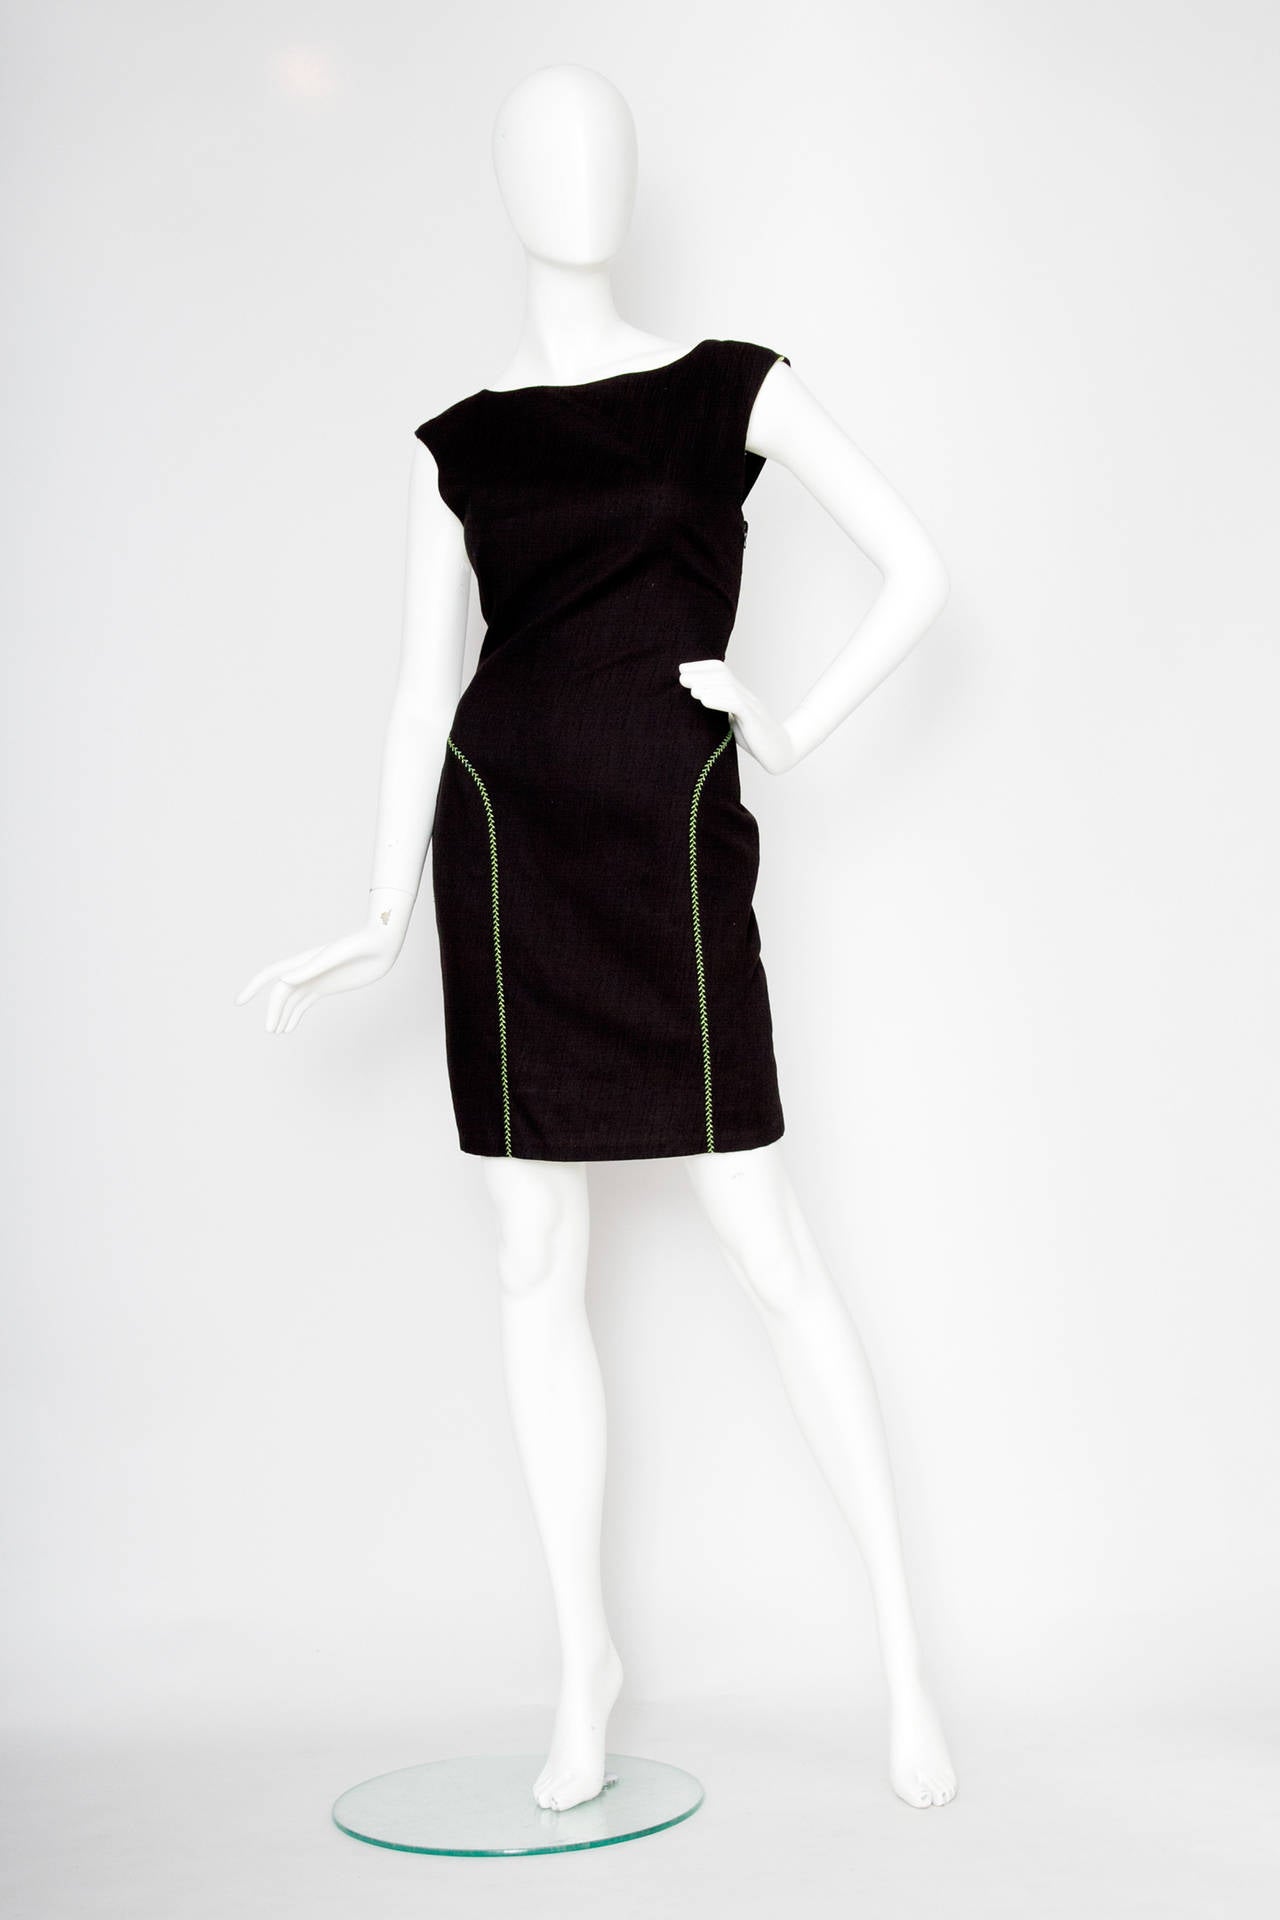 A lovely 1980s Gianni Versace Couture black cotton cocktail dress with a bright green topstitching detail throughout. The dress has a high scoop neckline and a low back. The straps have a wrap detail attached to the back and transcends as cap